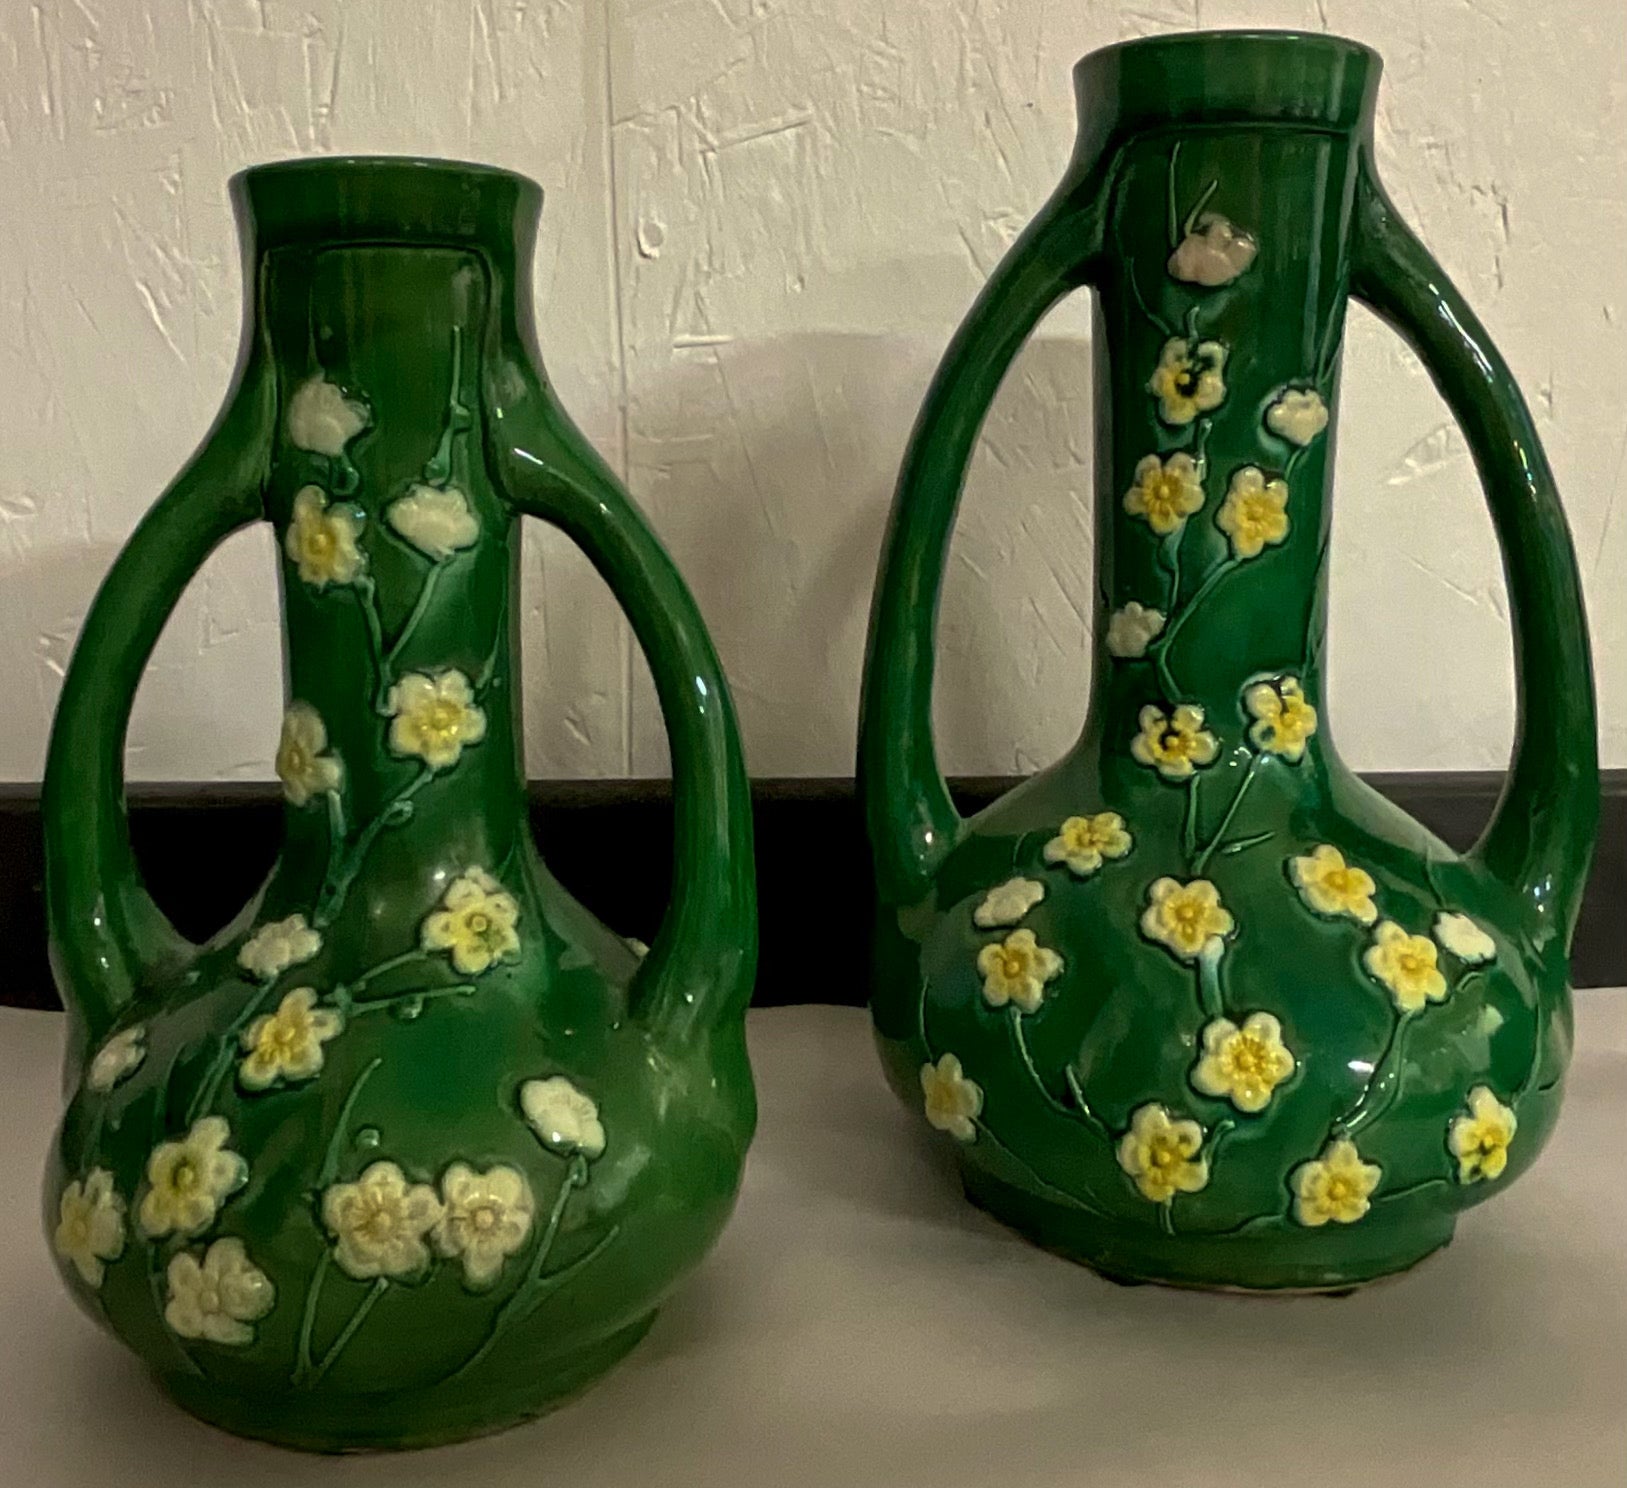 These is set of two Chinese Export style vases or ewers. They are a vivid green majolica glaze with a spraying of white blossoms. Measures: Small ; 5.25”H x 8.5”H.